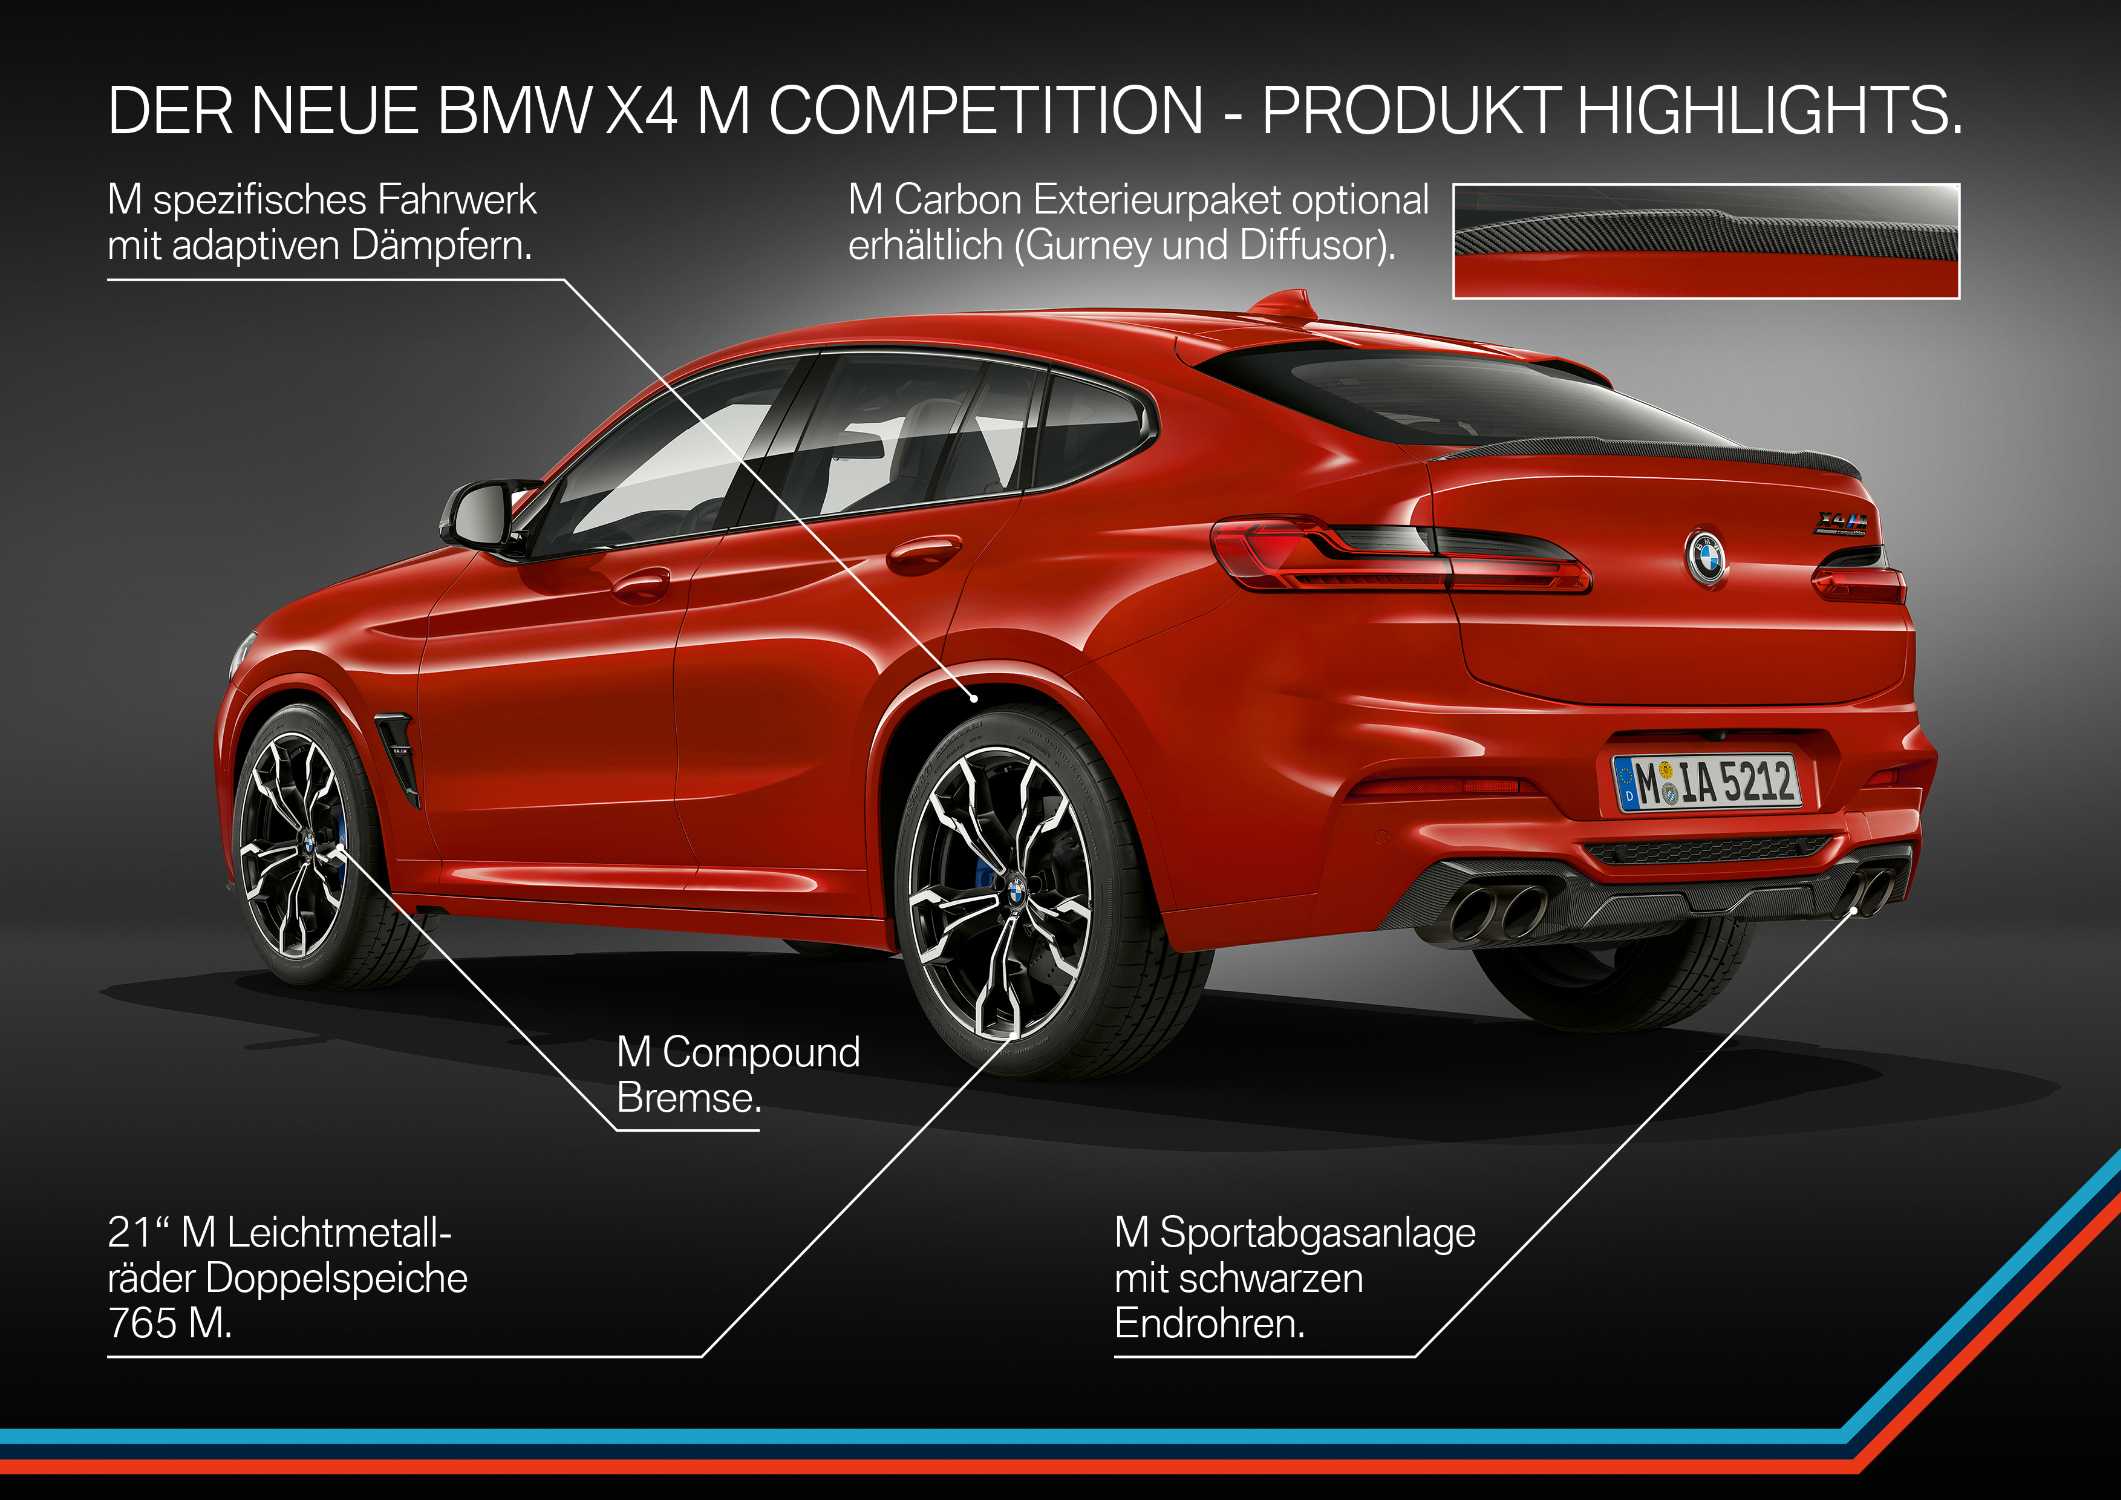 The all-new BMW X4 M Competition (02/2019).